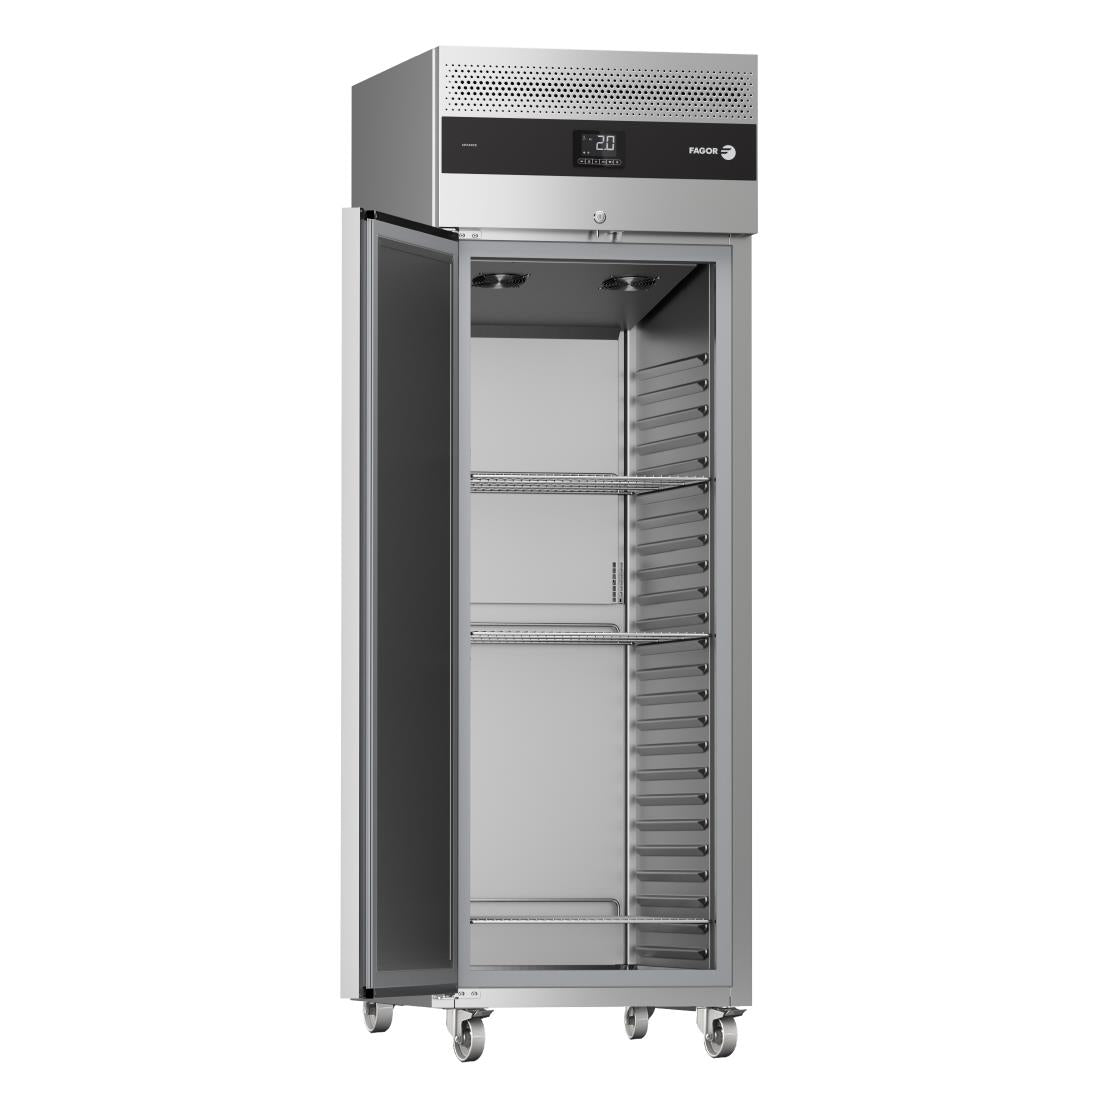 FU001 Fagor Advance Gastronorm Upright Cabinet Fridge 1 Door AUP-11G JD Catering Equipment Solutions Ltd